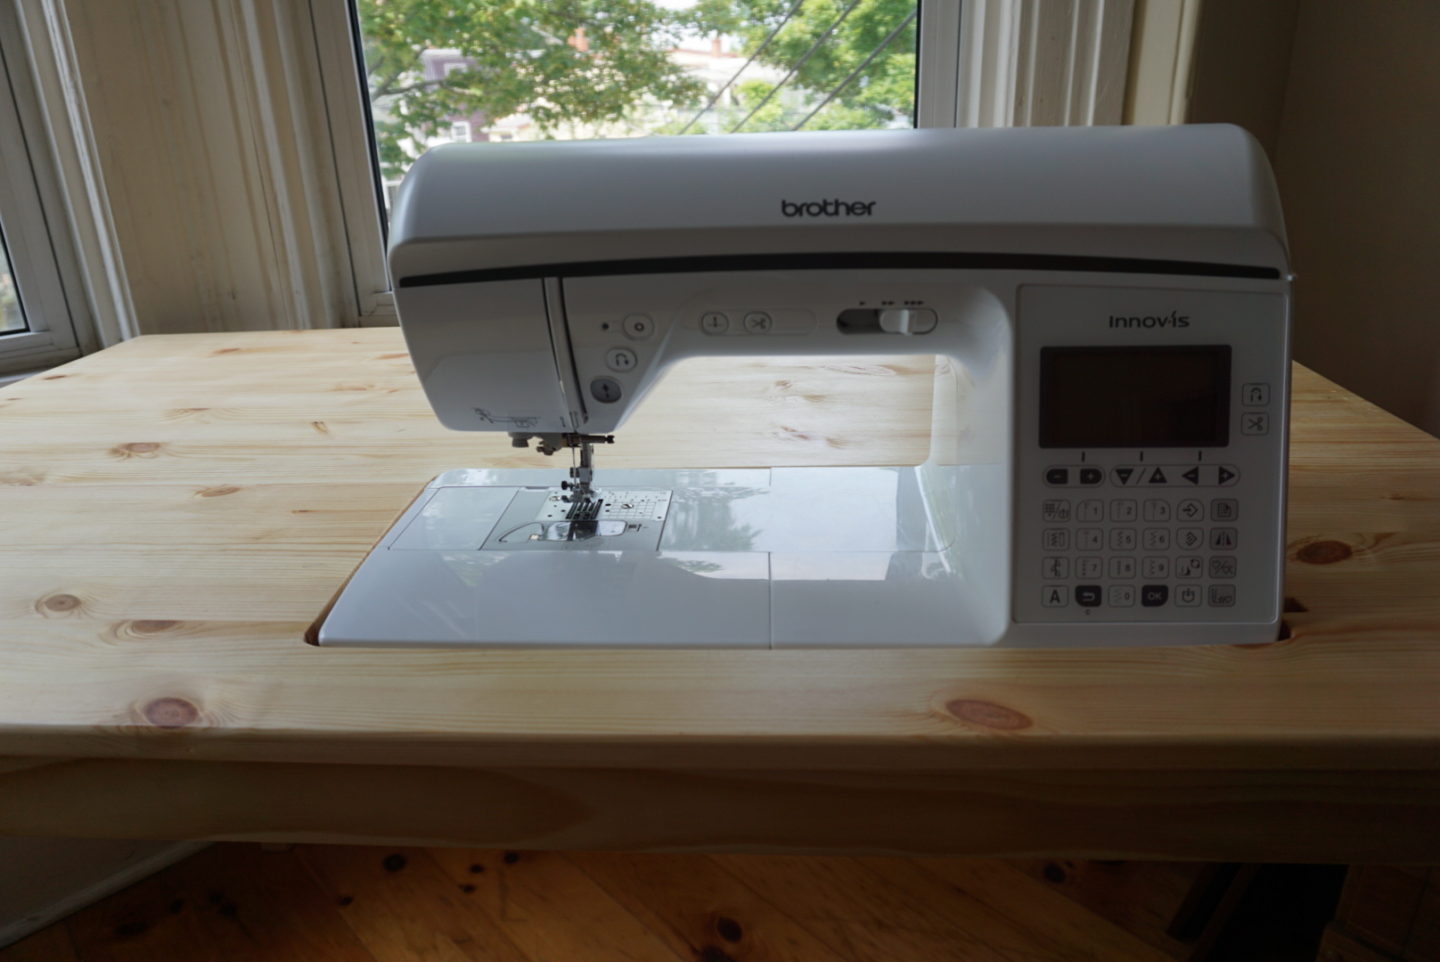 IKEA Sewing Table Hack